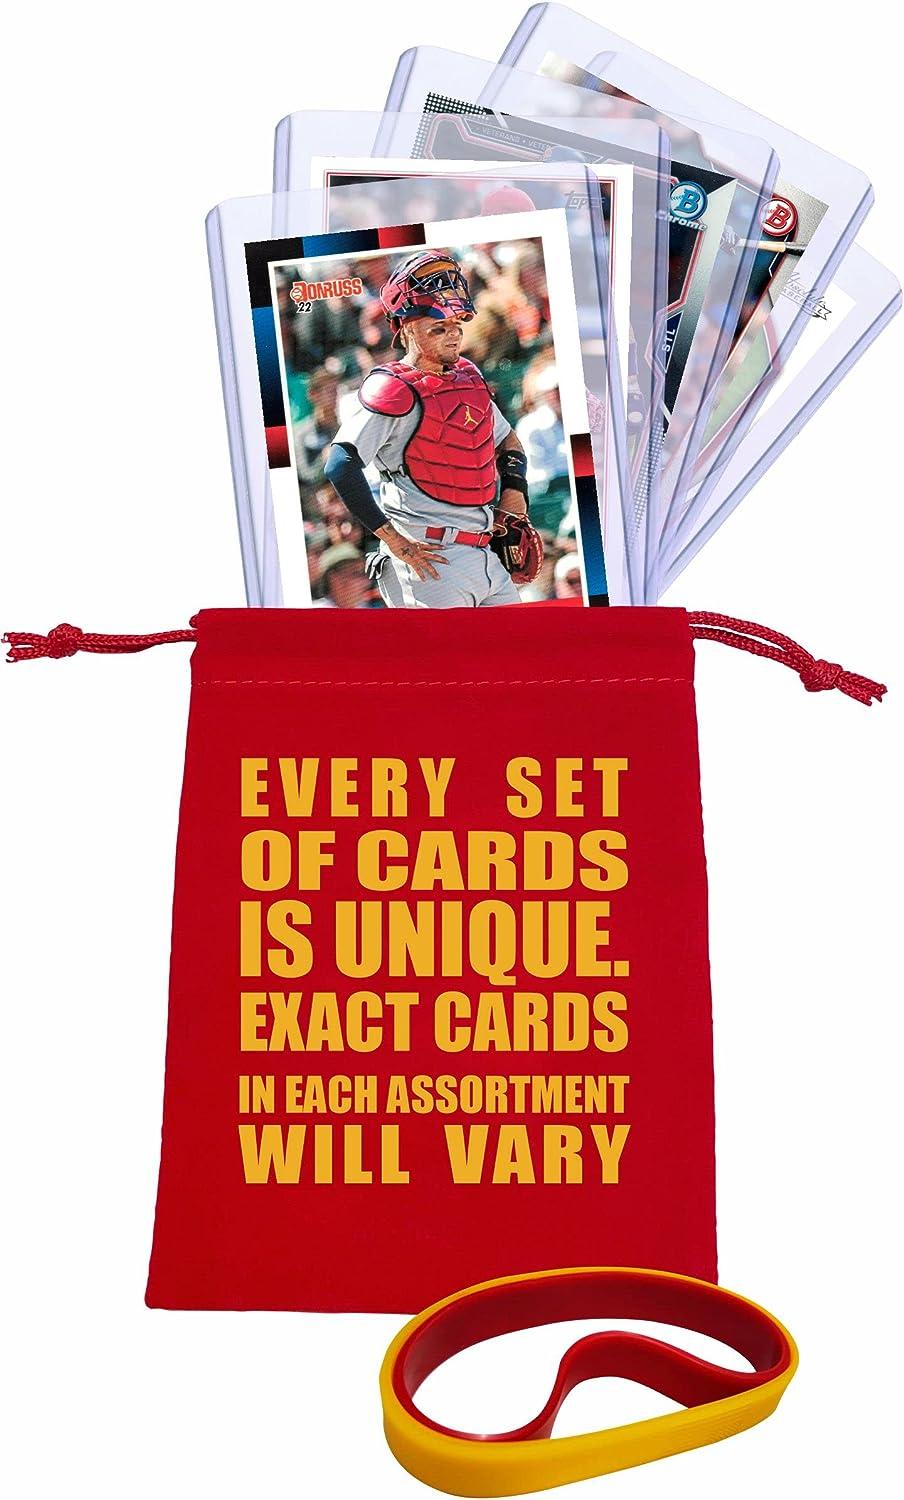 Yadier Molina Baseball Cards (5) Assorted St. Louis Cardinals Trading Card  and Wristbands Gift Bundle